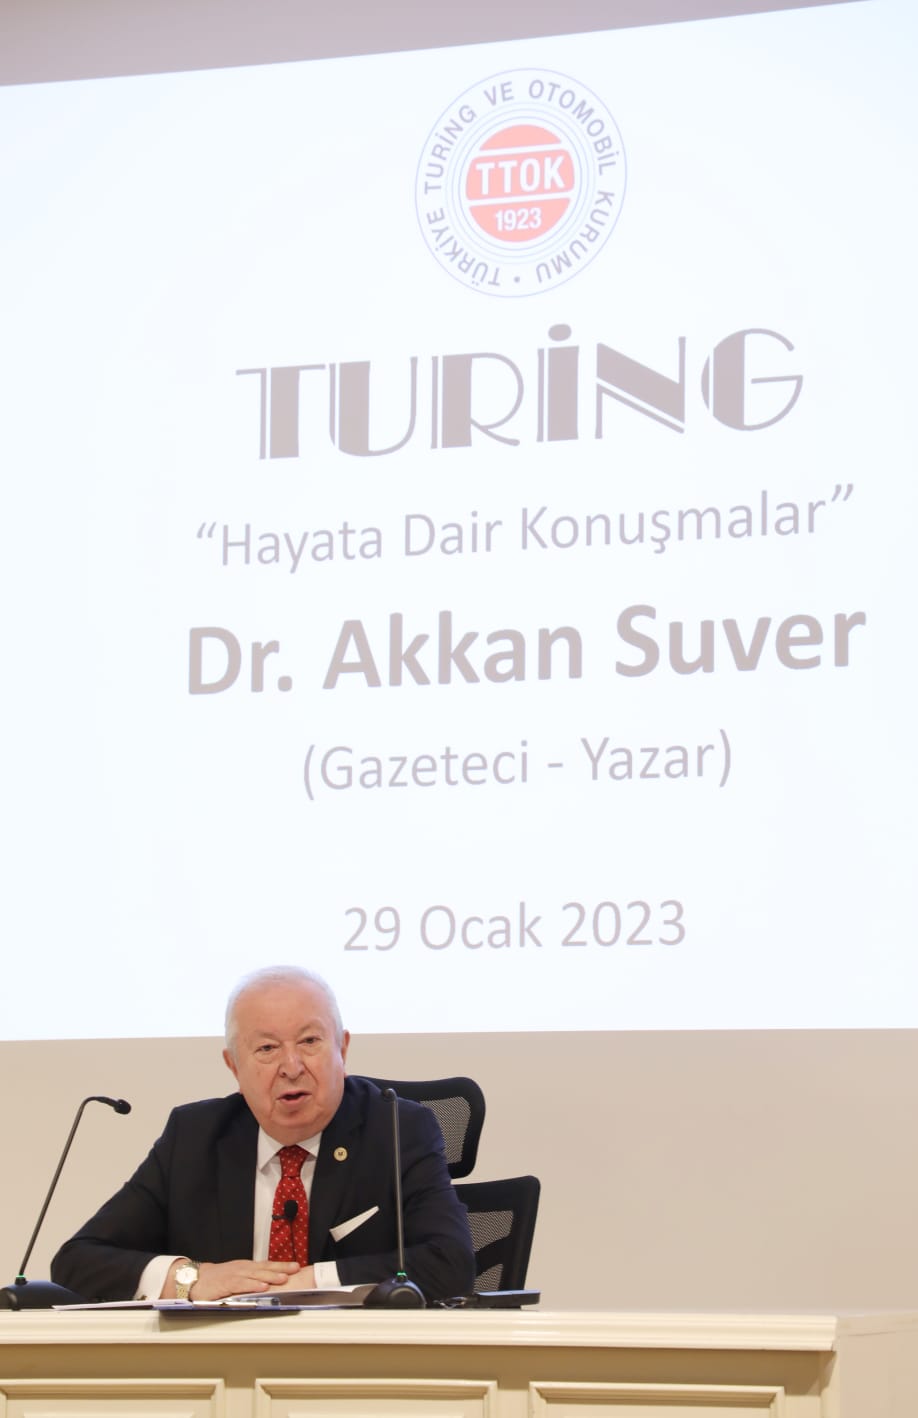 Dr. Akkan Suver gave a conference at Türkiye Turing Aut